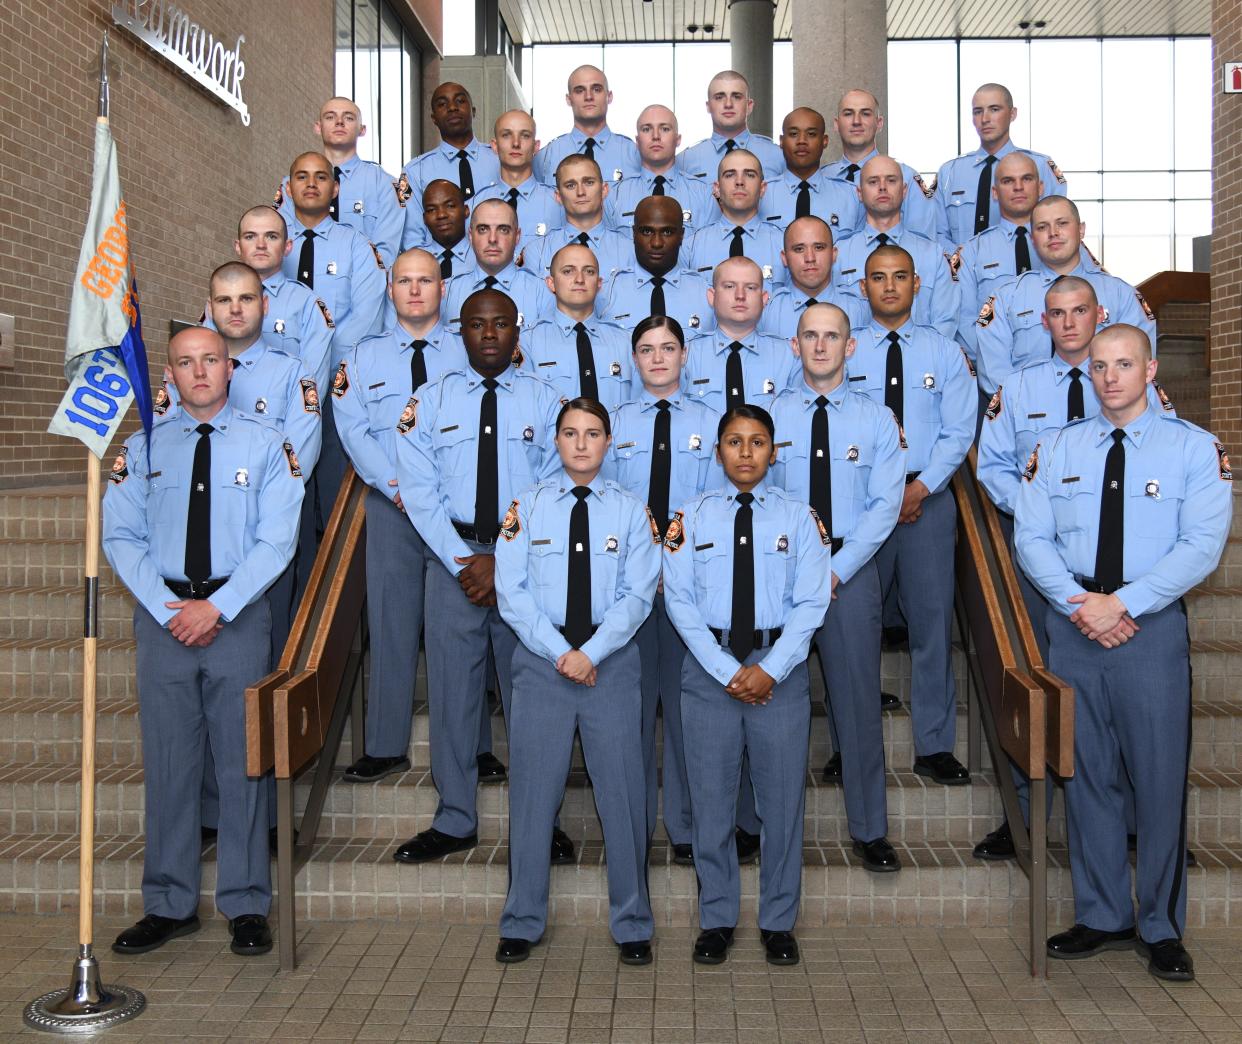 A group photo of the 106th Georgia State Patrol trooper class, provided by the Georgia Department of Public Safety.